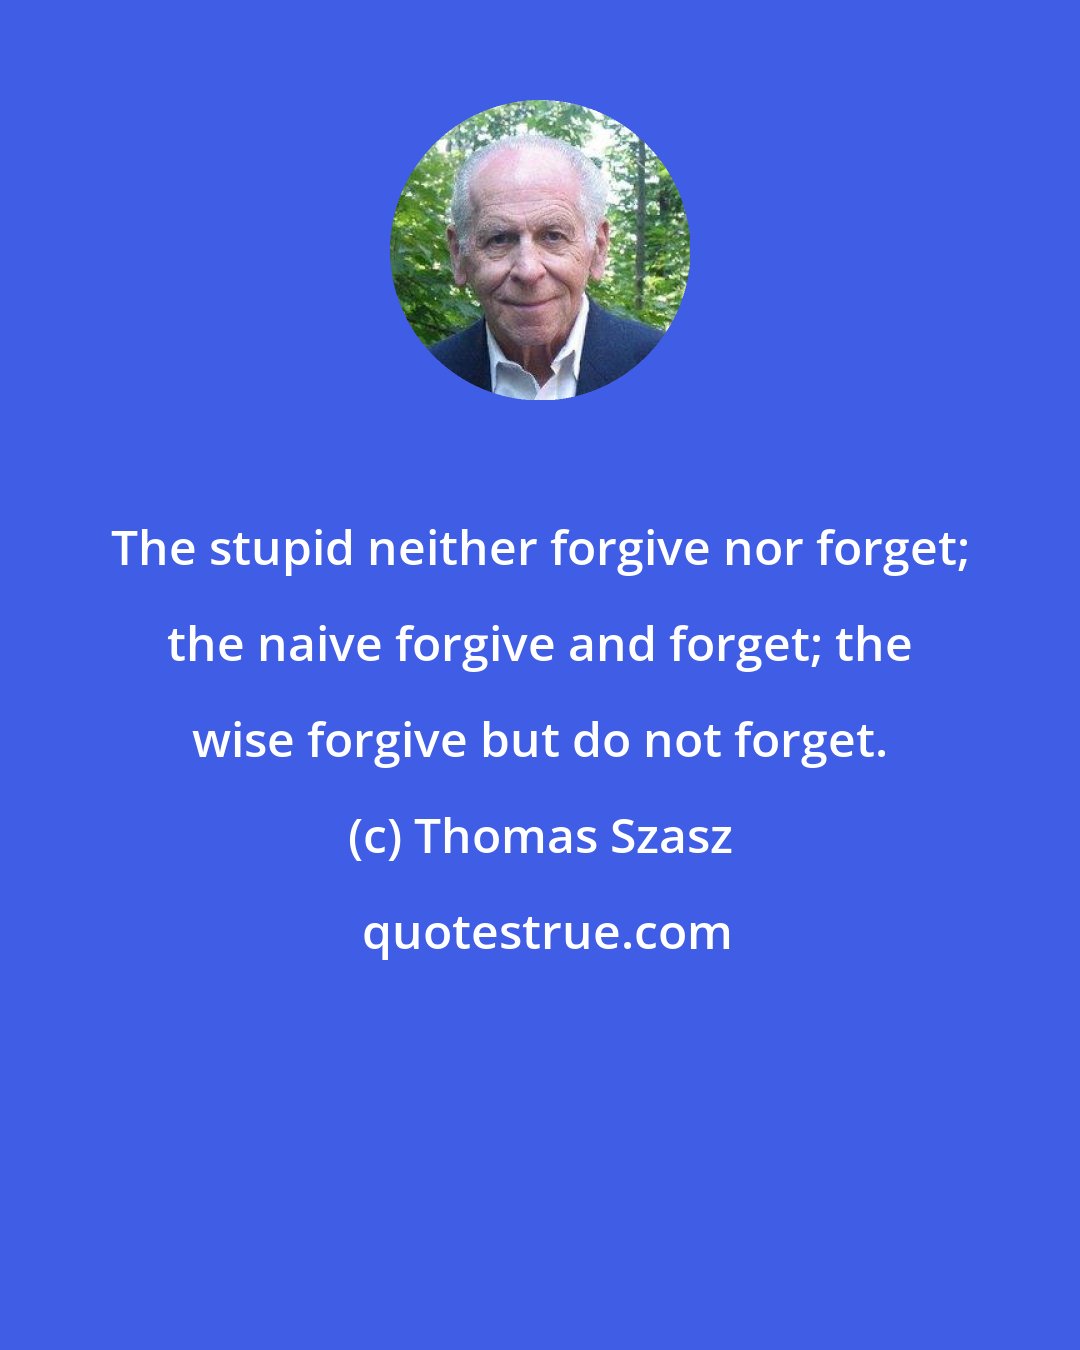 Thomas Szasz: The stupid neither forgive nor forget; the naive forgive and forget; the wise forgive but do not forget.